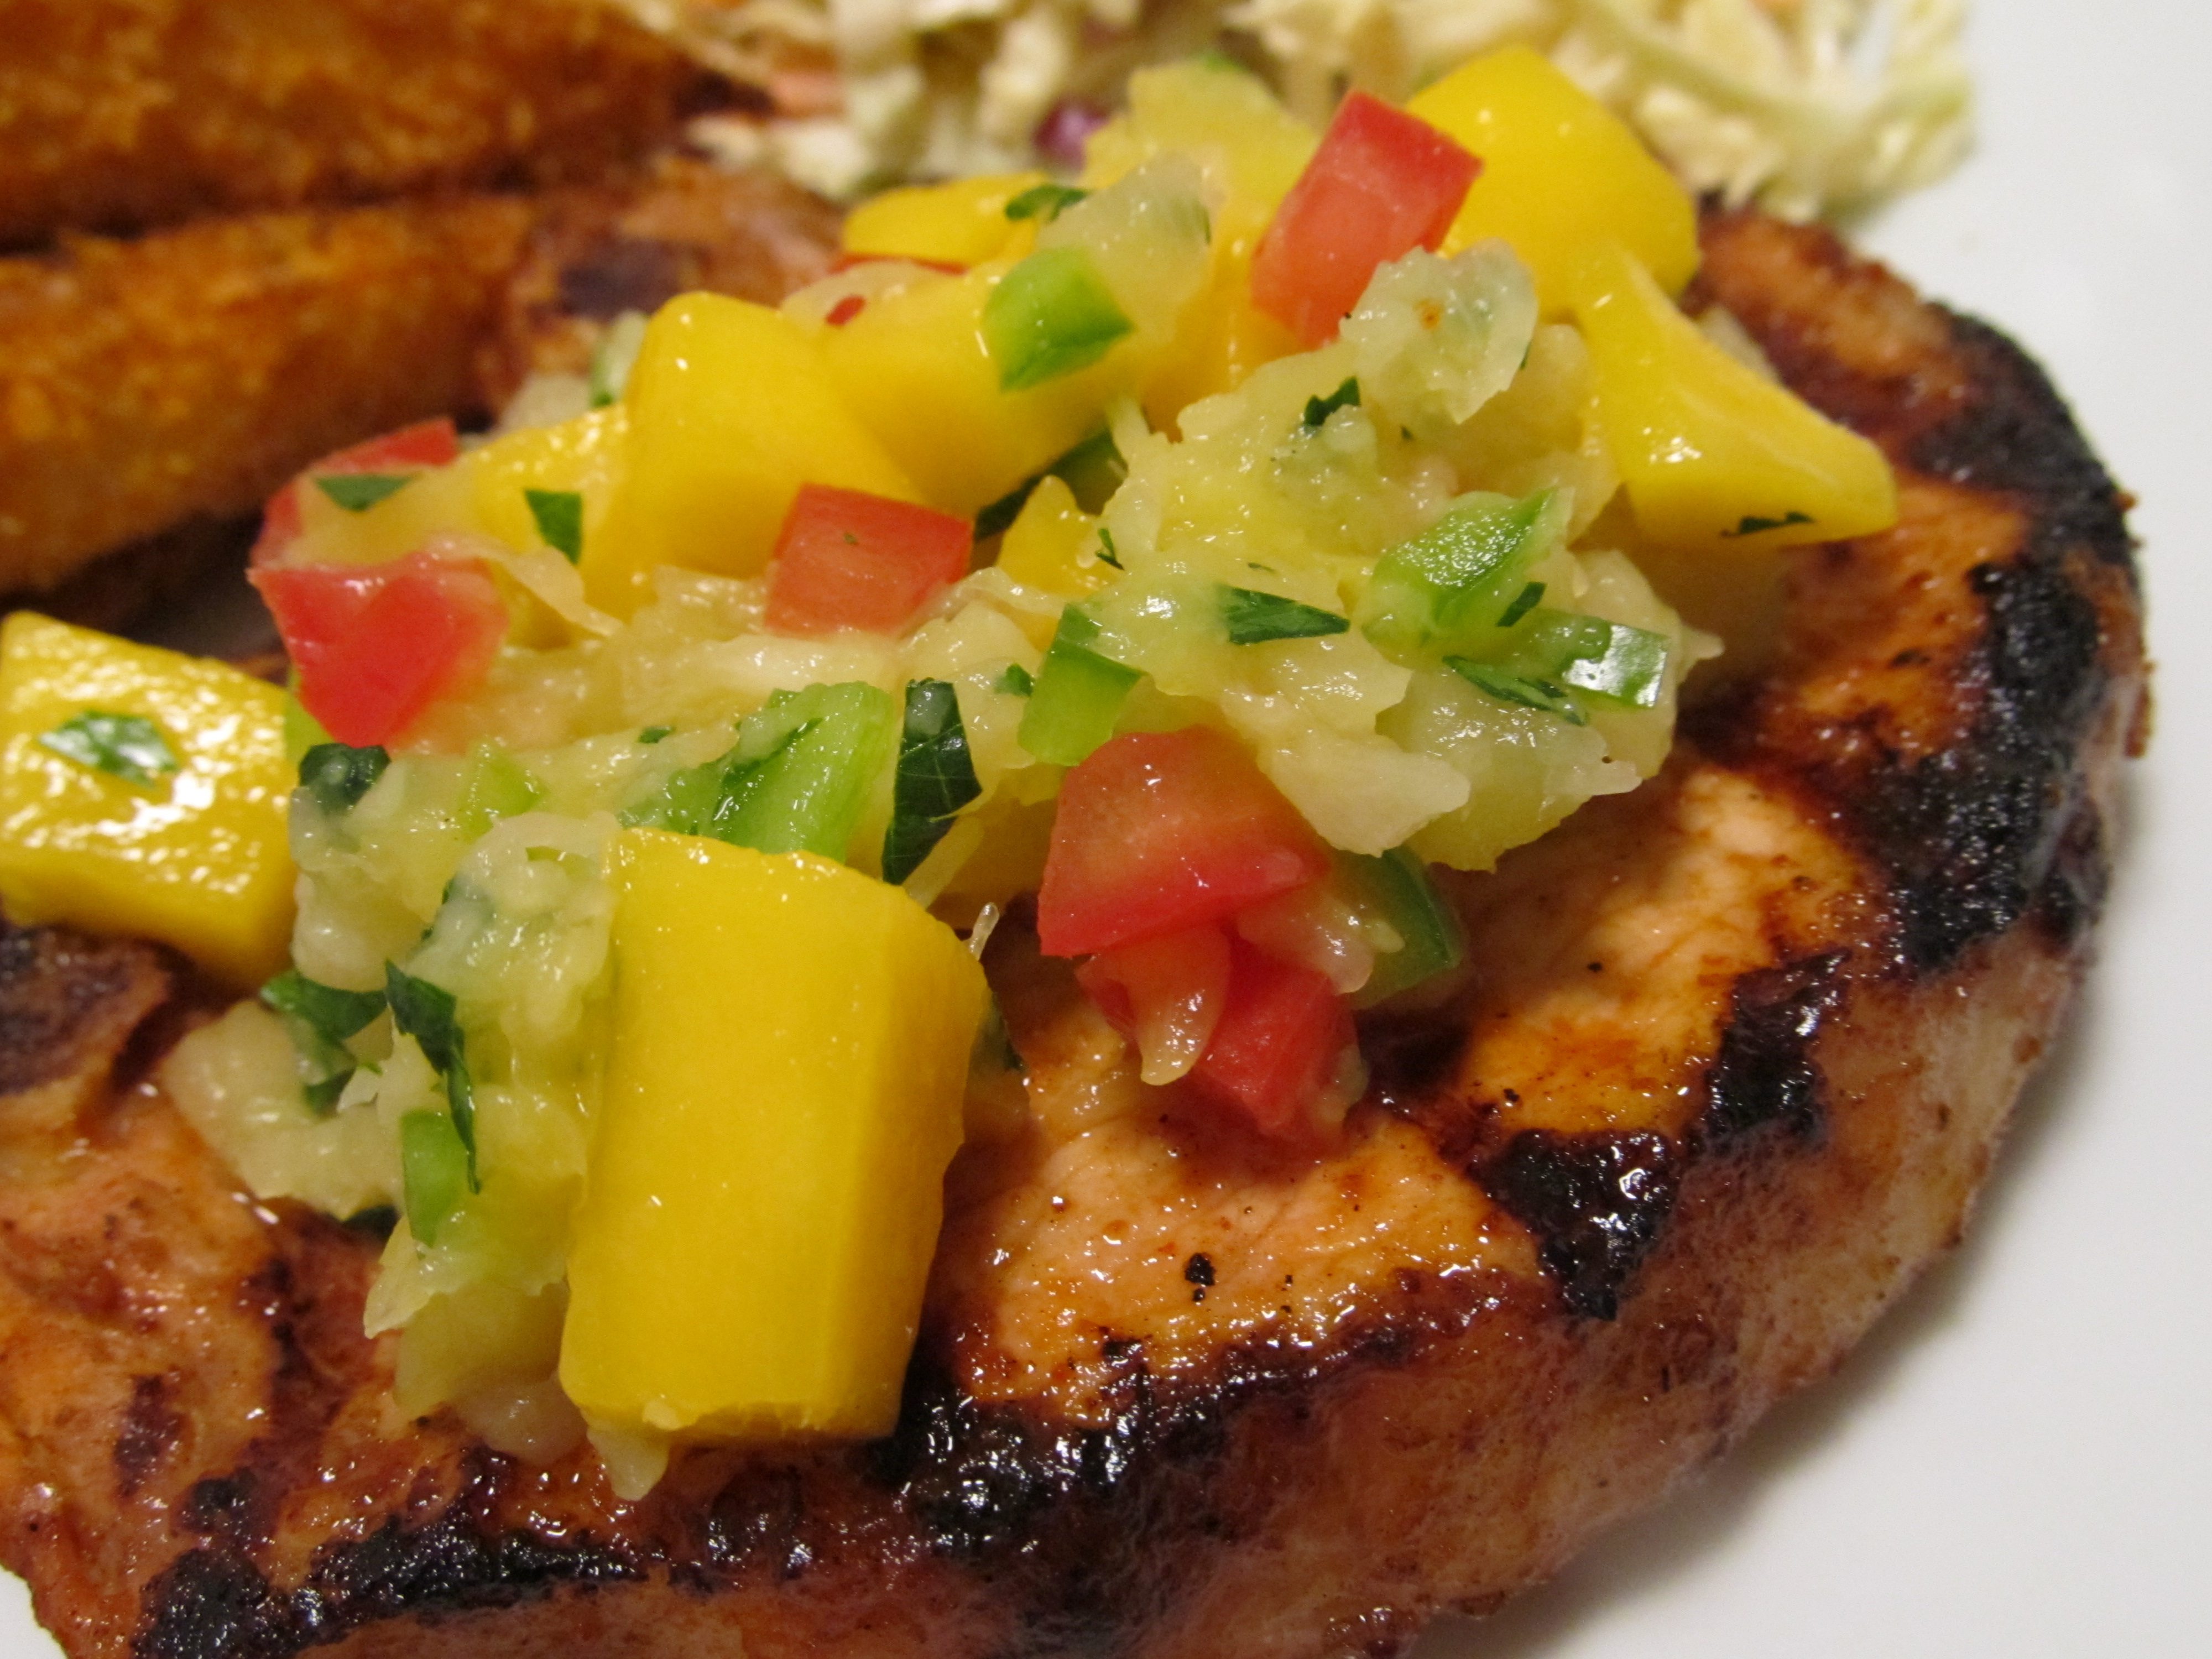 Spicy Grilled Pork Chops with Mango Pineapple Salsa